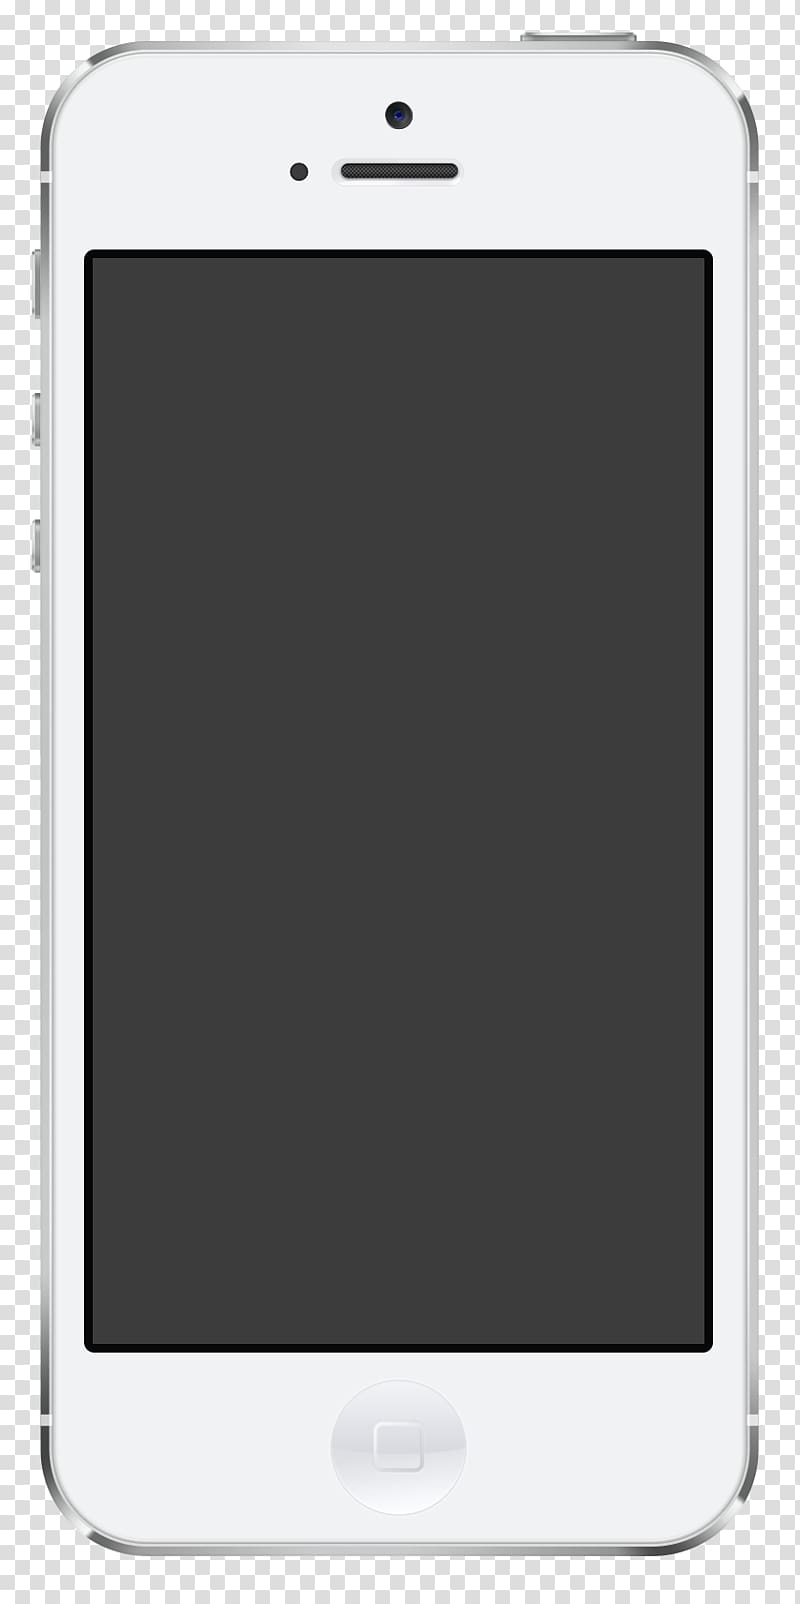 Iphone Apple transparent background PNG clipart